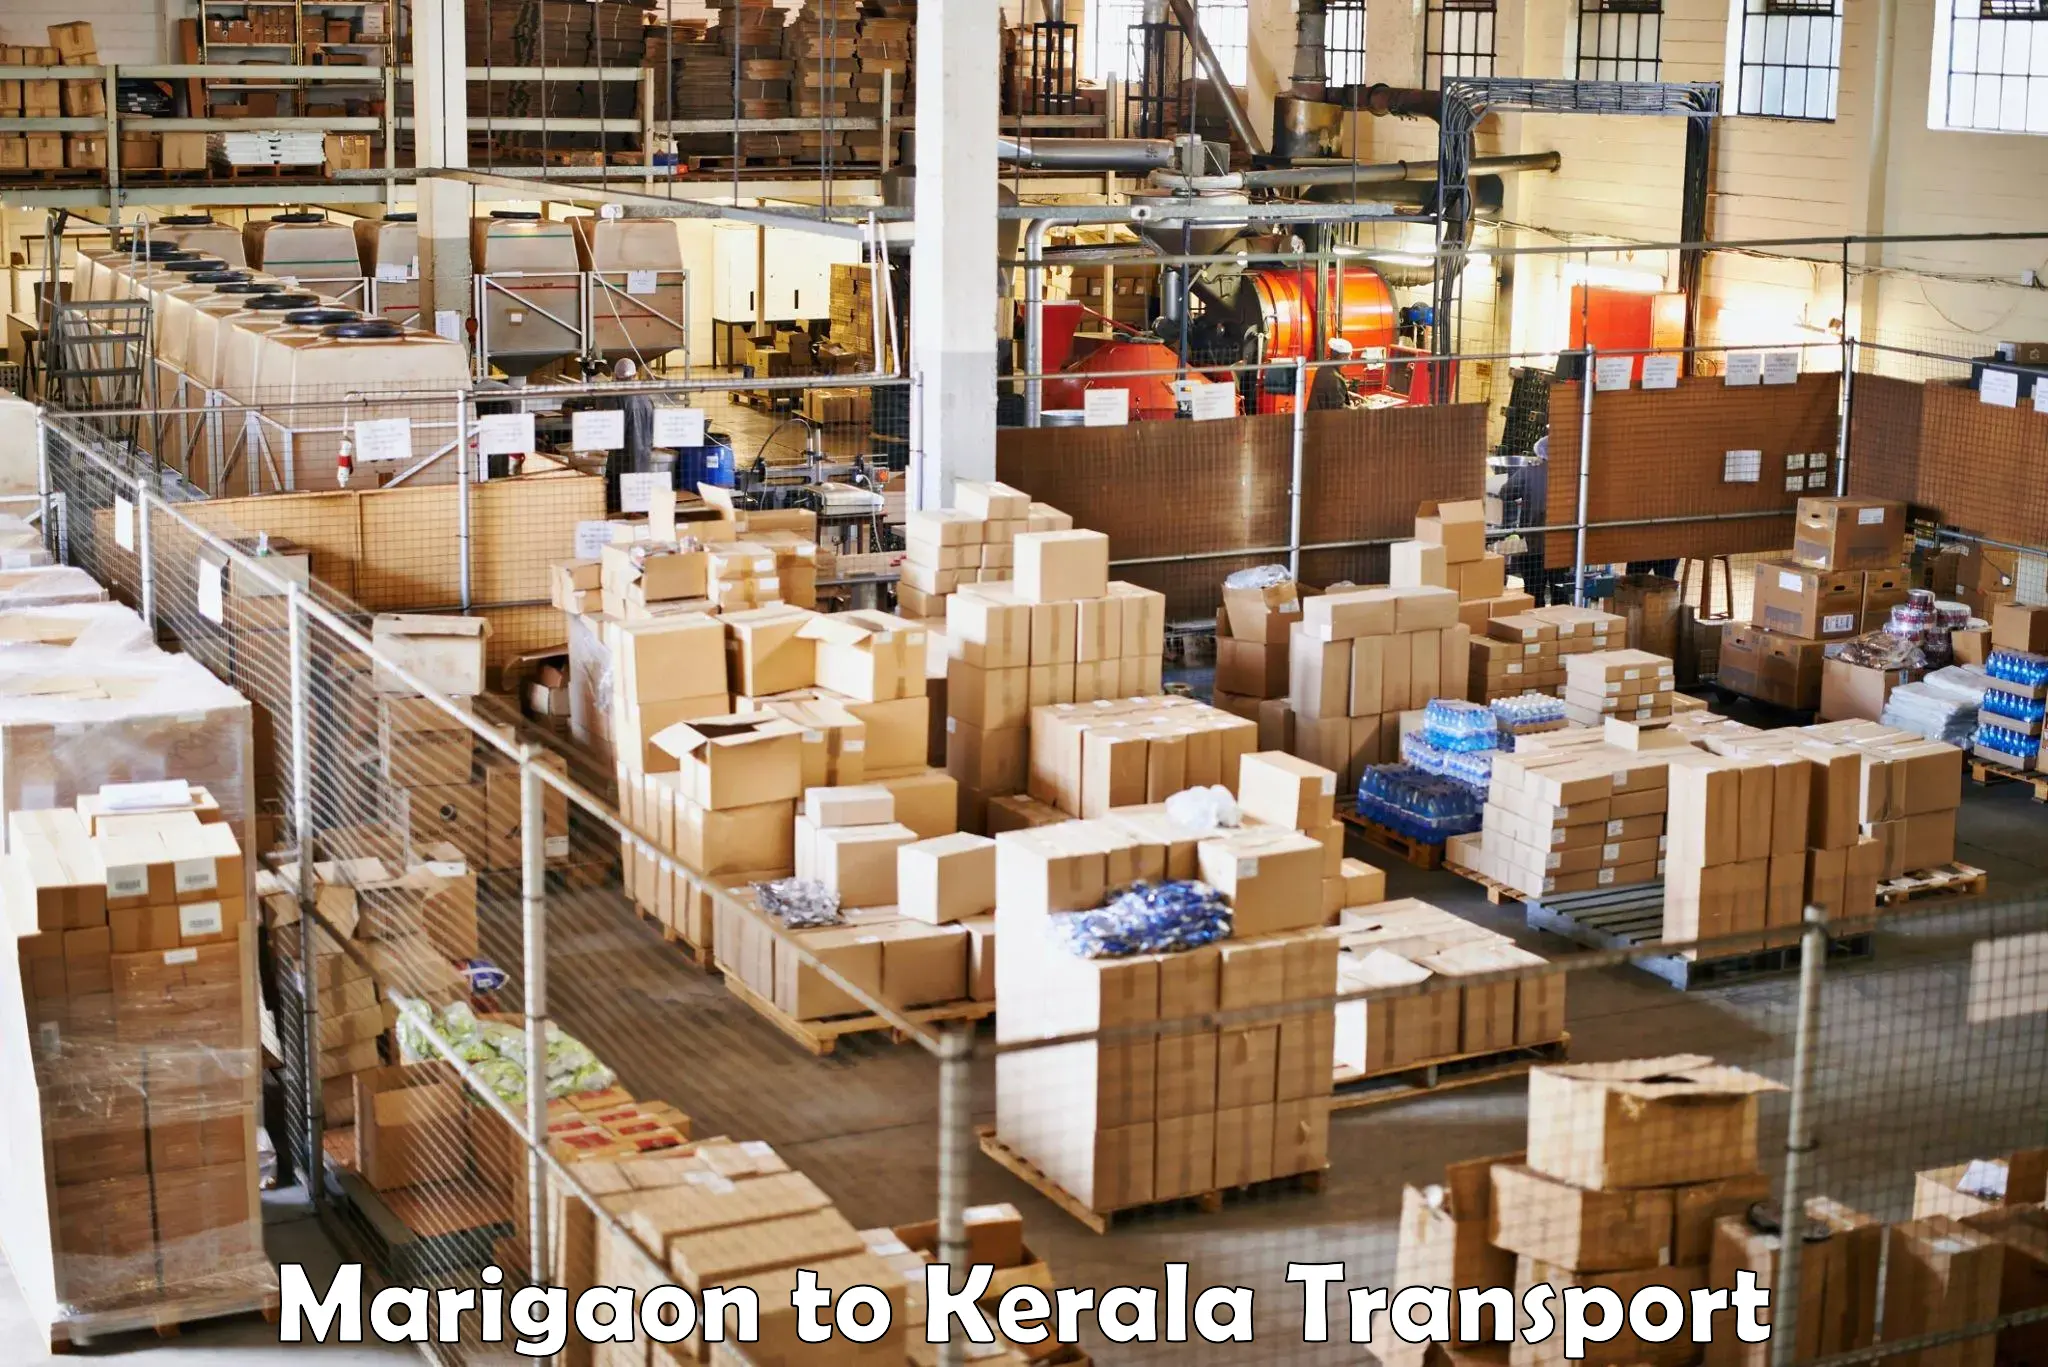 Daily parcel service transport Marigaon to Shoranur